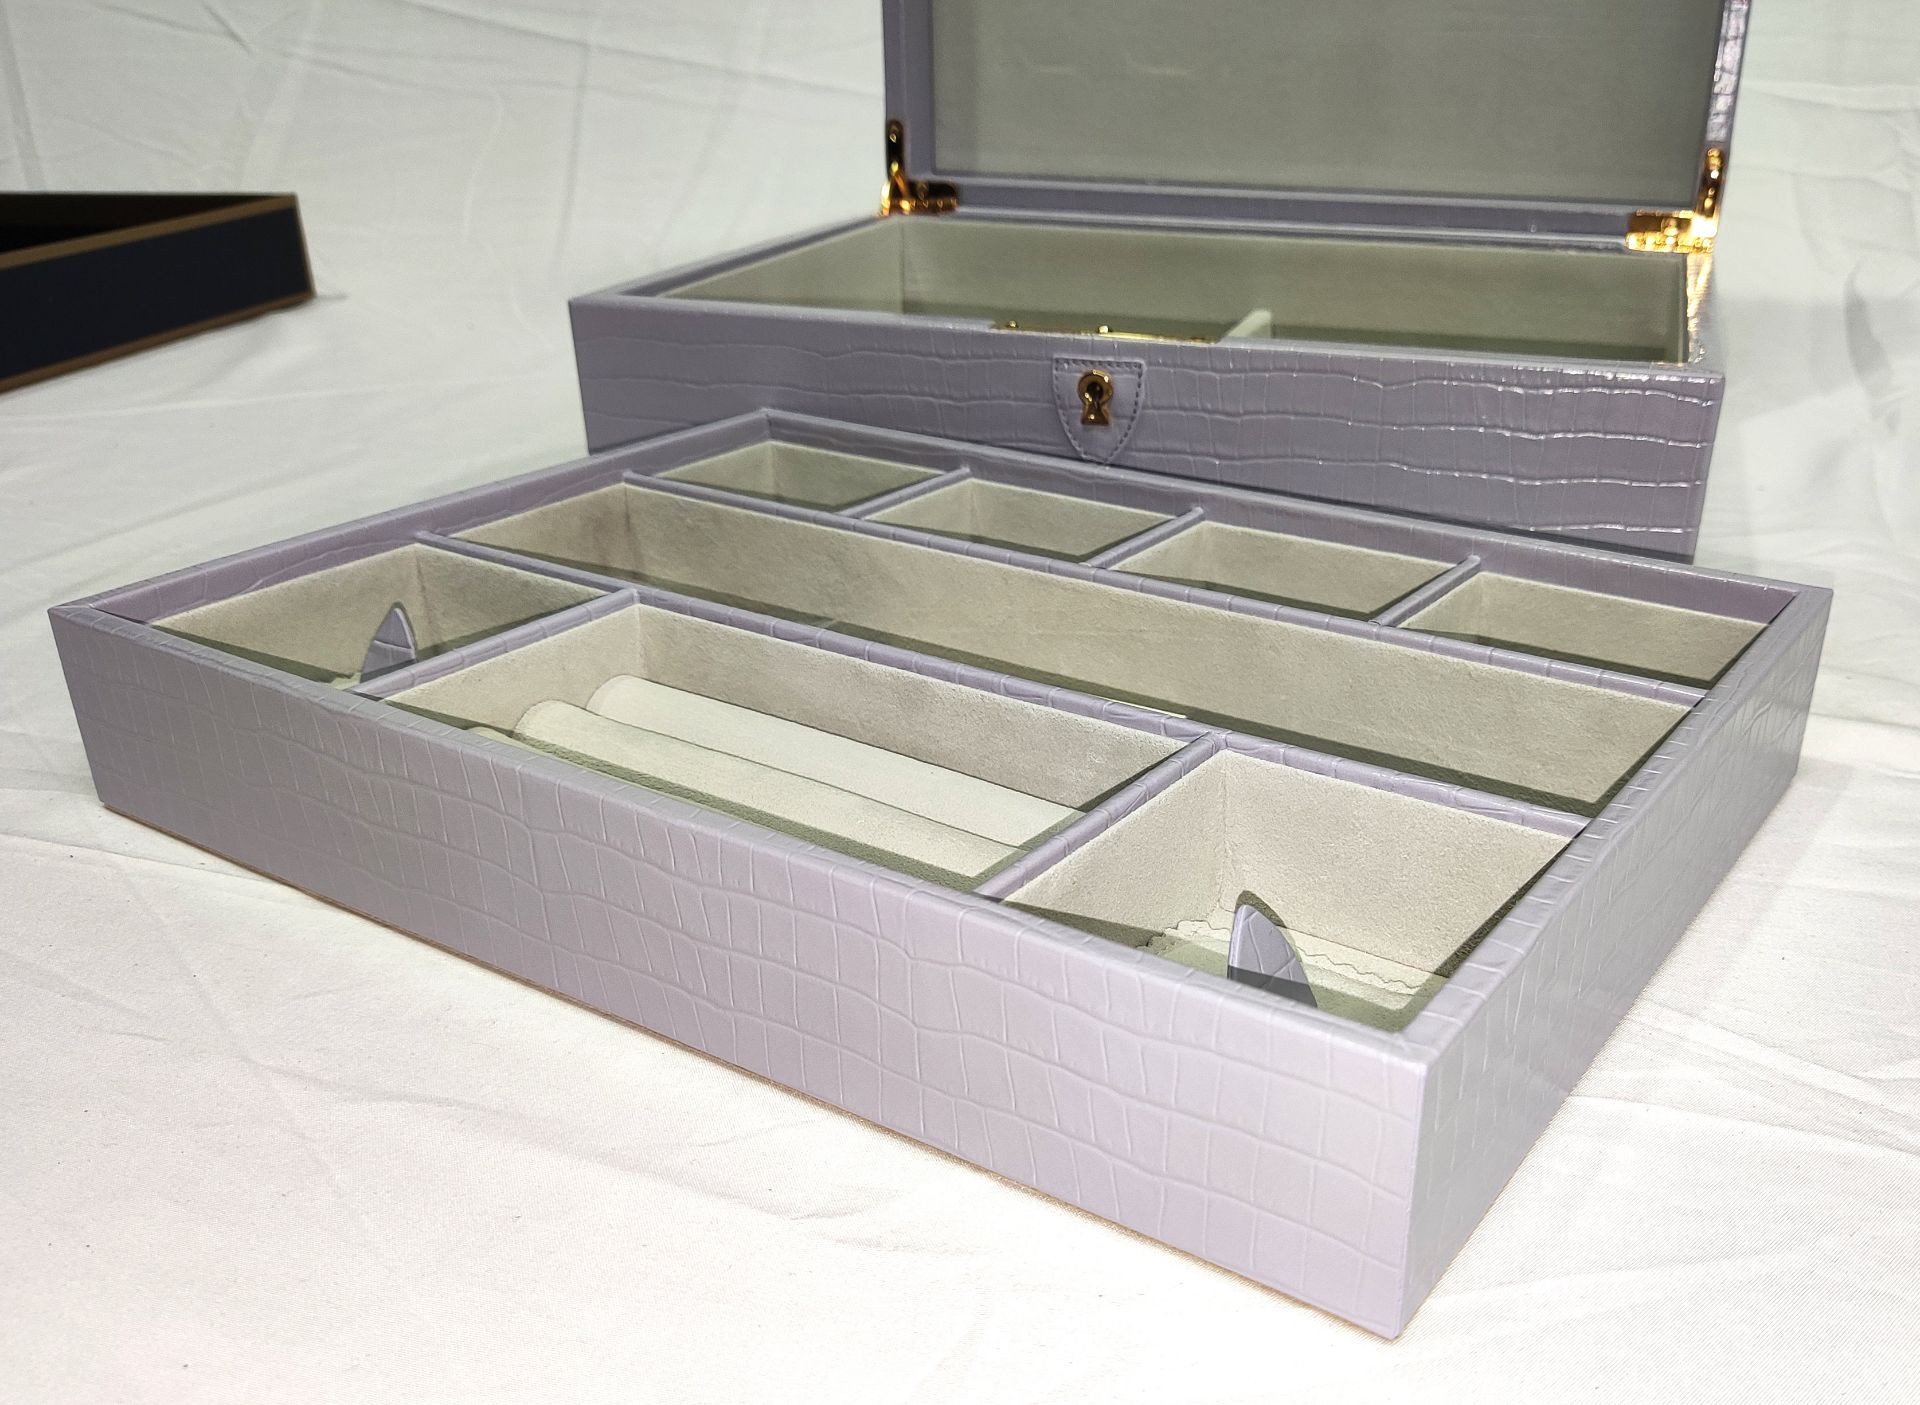 1 x ASPINAL OF LONDON Grand Luxe Jewellery Case In Deep Shine English Lavender Croc - Original - Image 4 of 34